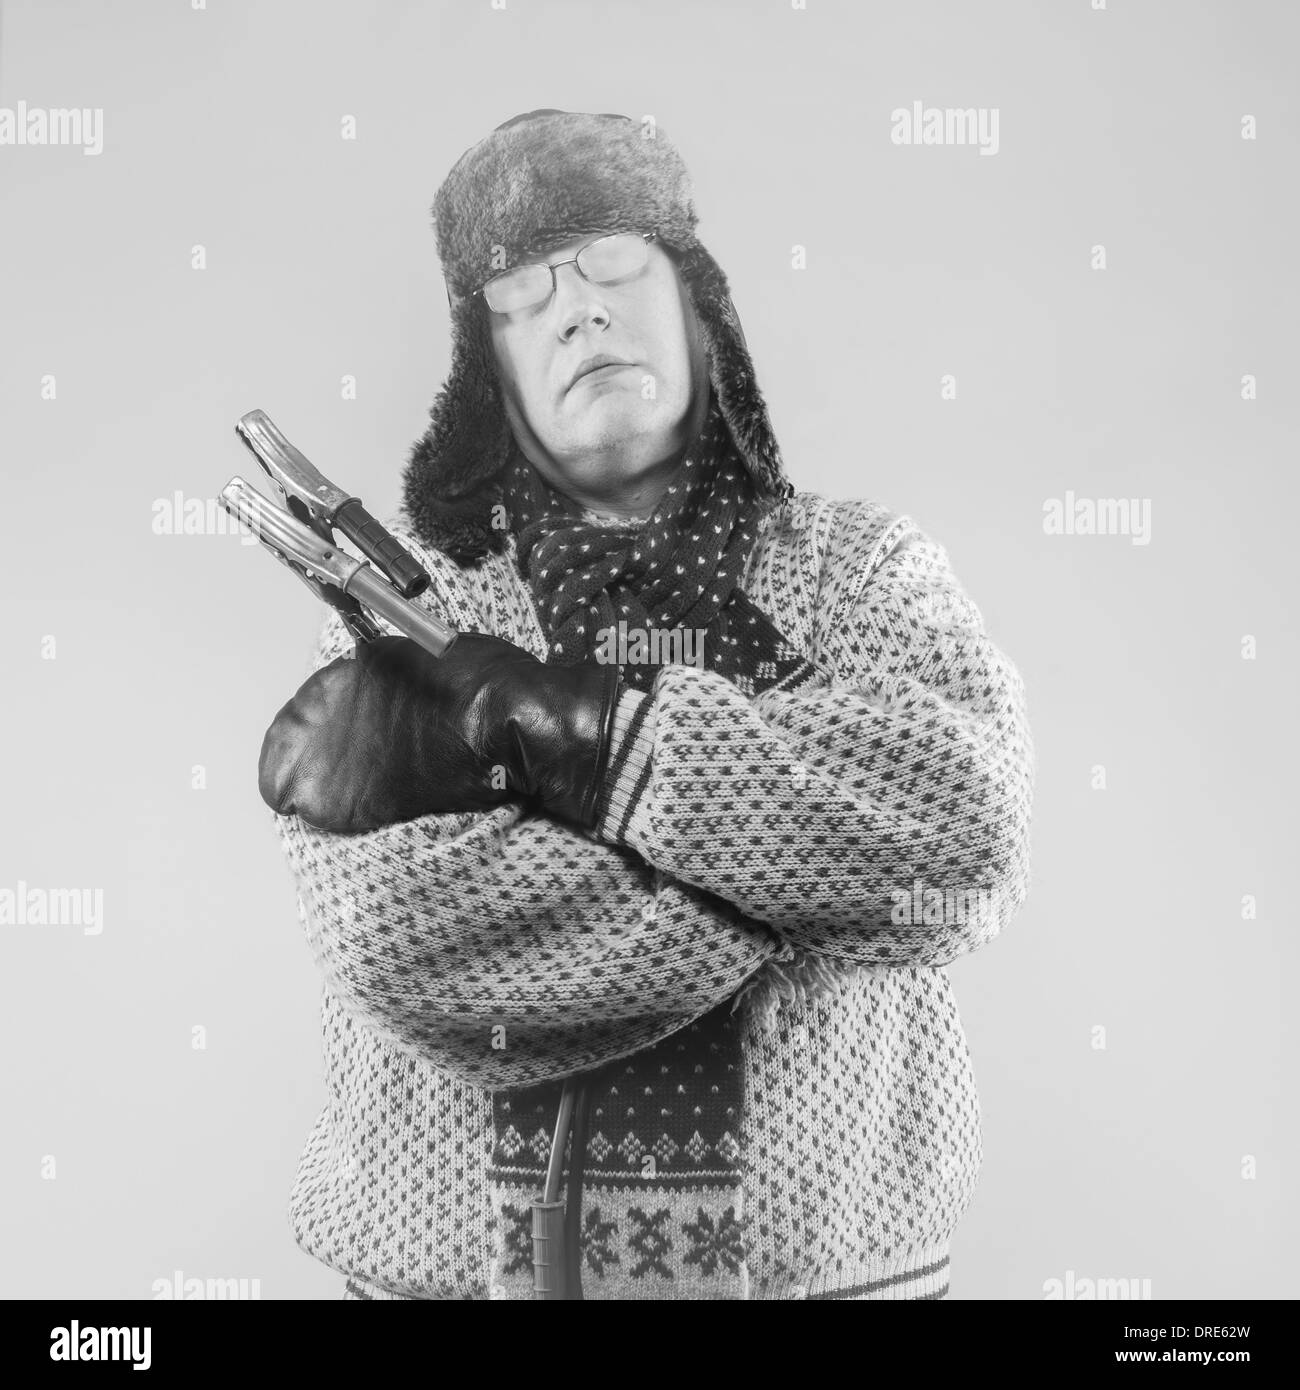 Frozen man with the jumper cables, black and white image Stock Photo